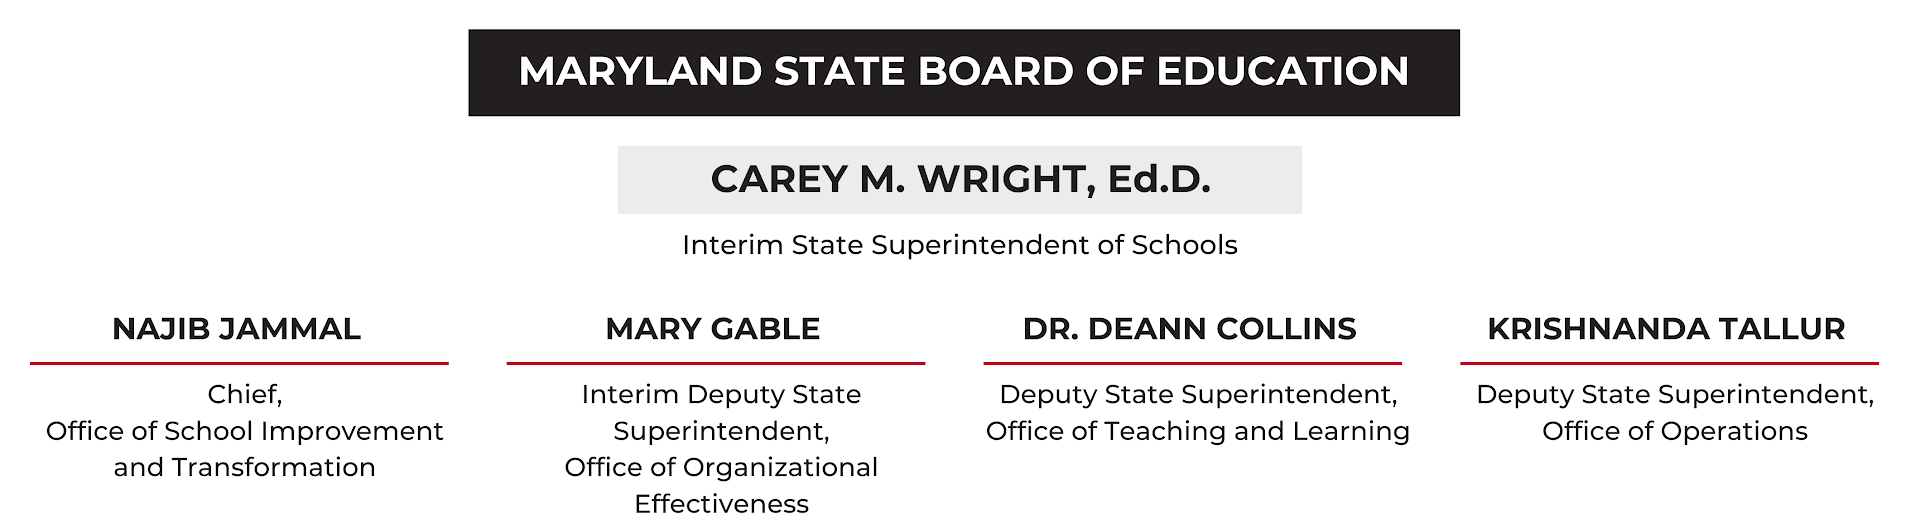 MSDE Organization Chart. Level 1: State Board of Education. Level 2, Office of the State Superintendent, Mohammed Choudhury Level 3: Office of School Improvement and Transformation, Najib Jammal, Office of the Deputy for Organizational Effectiveness, Sylvia A. Lawson, Ph.D. Office of the Deputy for Teaching and Learning, Dr. Deann Collins, Deputy Superintendent Office of Operations, Krishnanda Tallur, Assistant State Superintendent, Division of Financial Planning, Operations, and Strategy, Justin Dayhoff